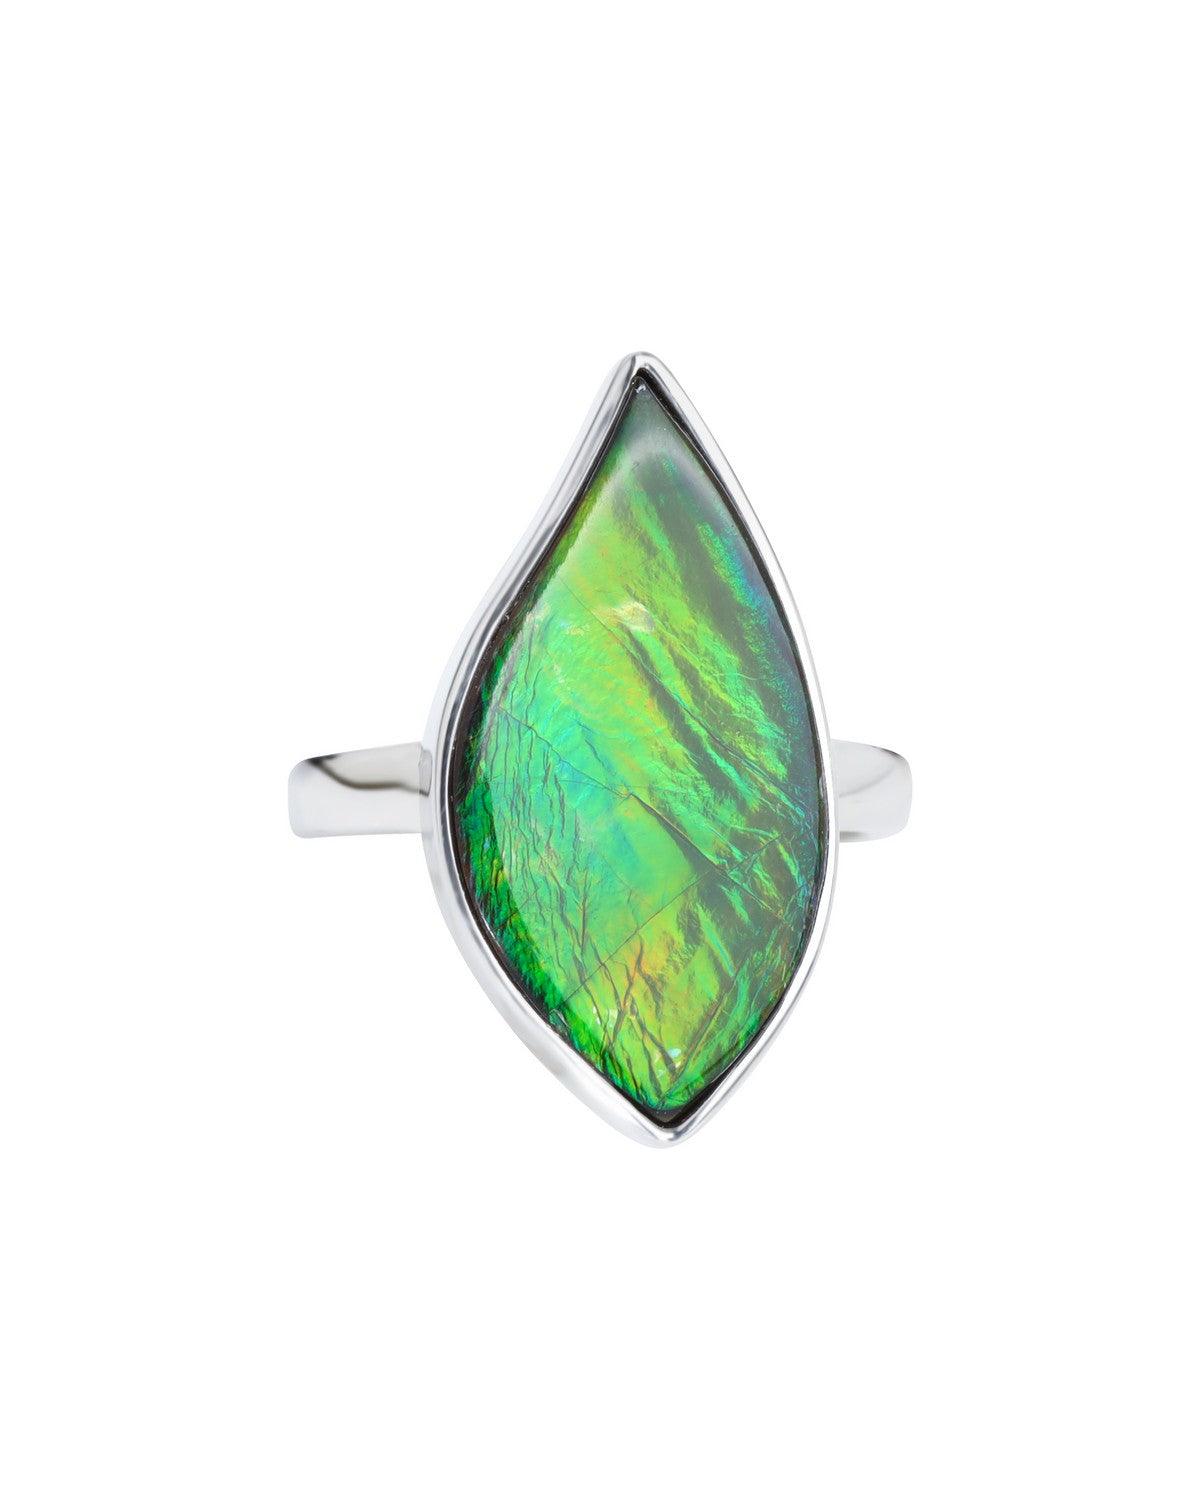 9.05 Ct. Ammolite Solid 925 Sterling Silver Ring Jewelry - YoTreasure